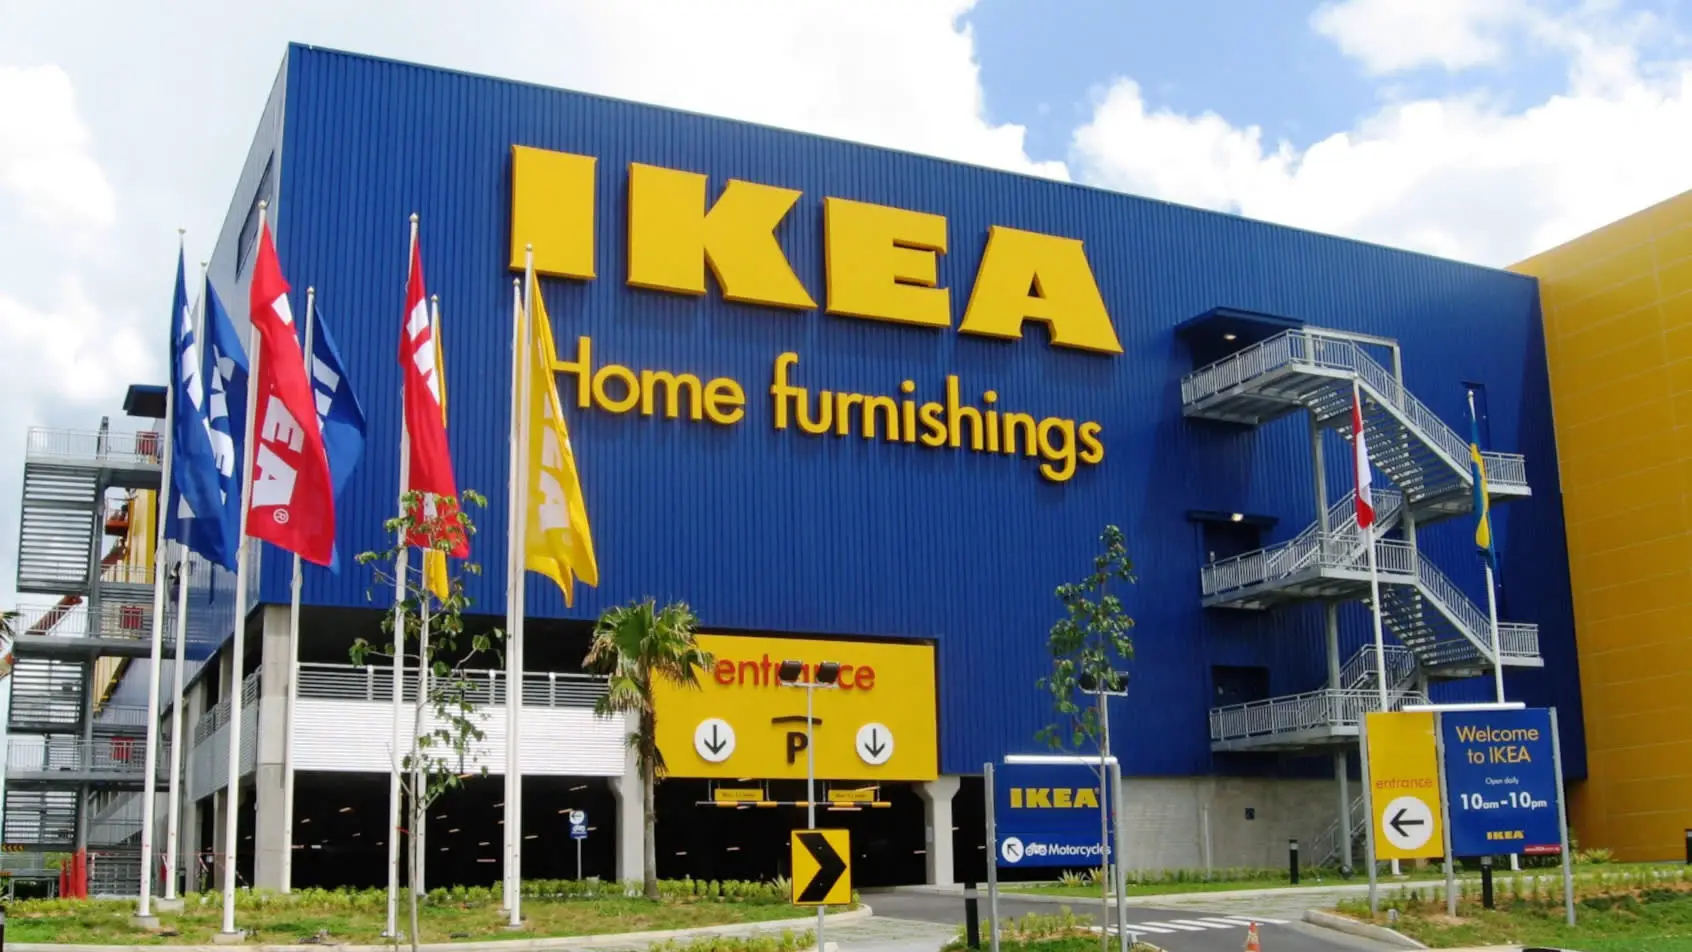 IKEA will hire about 500 workers